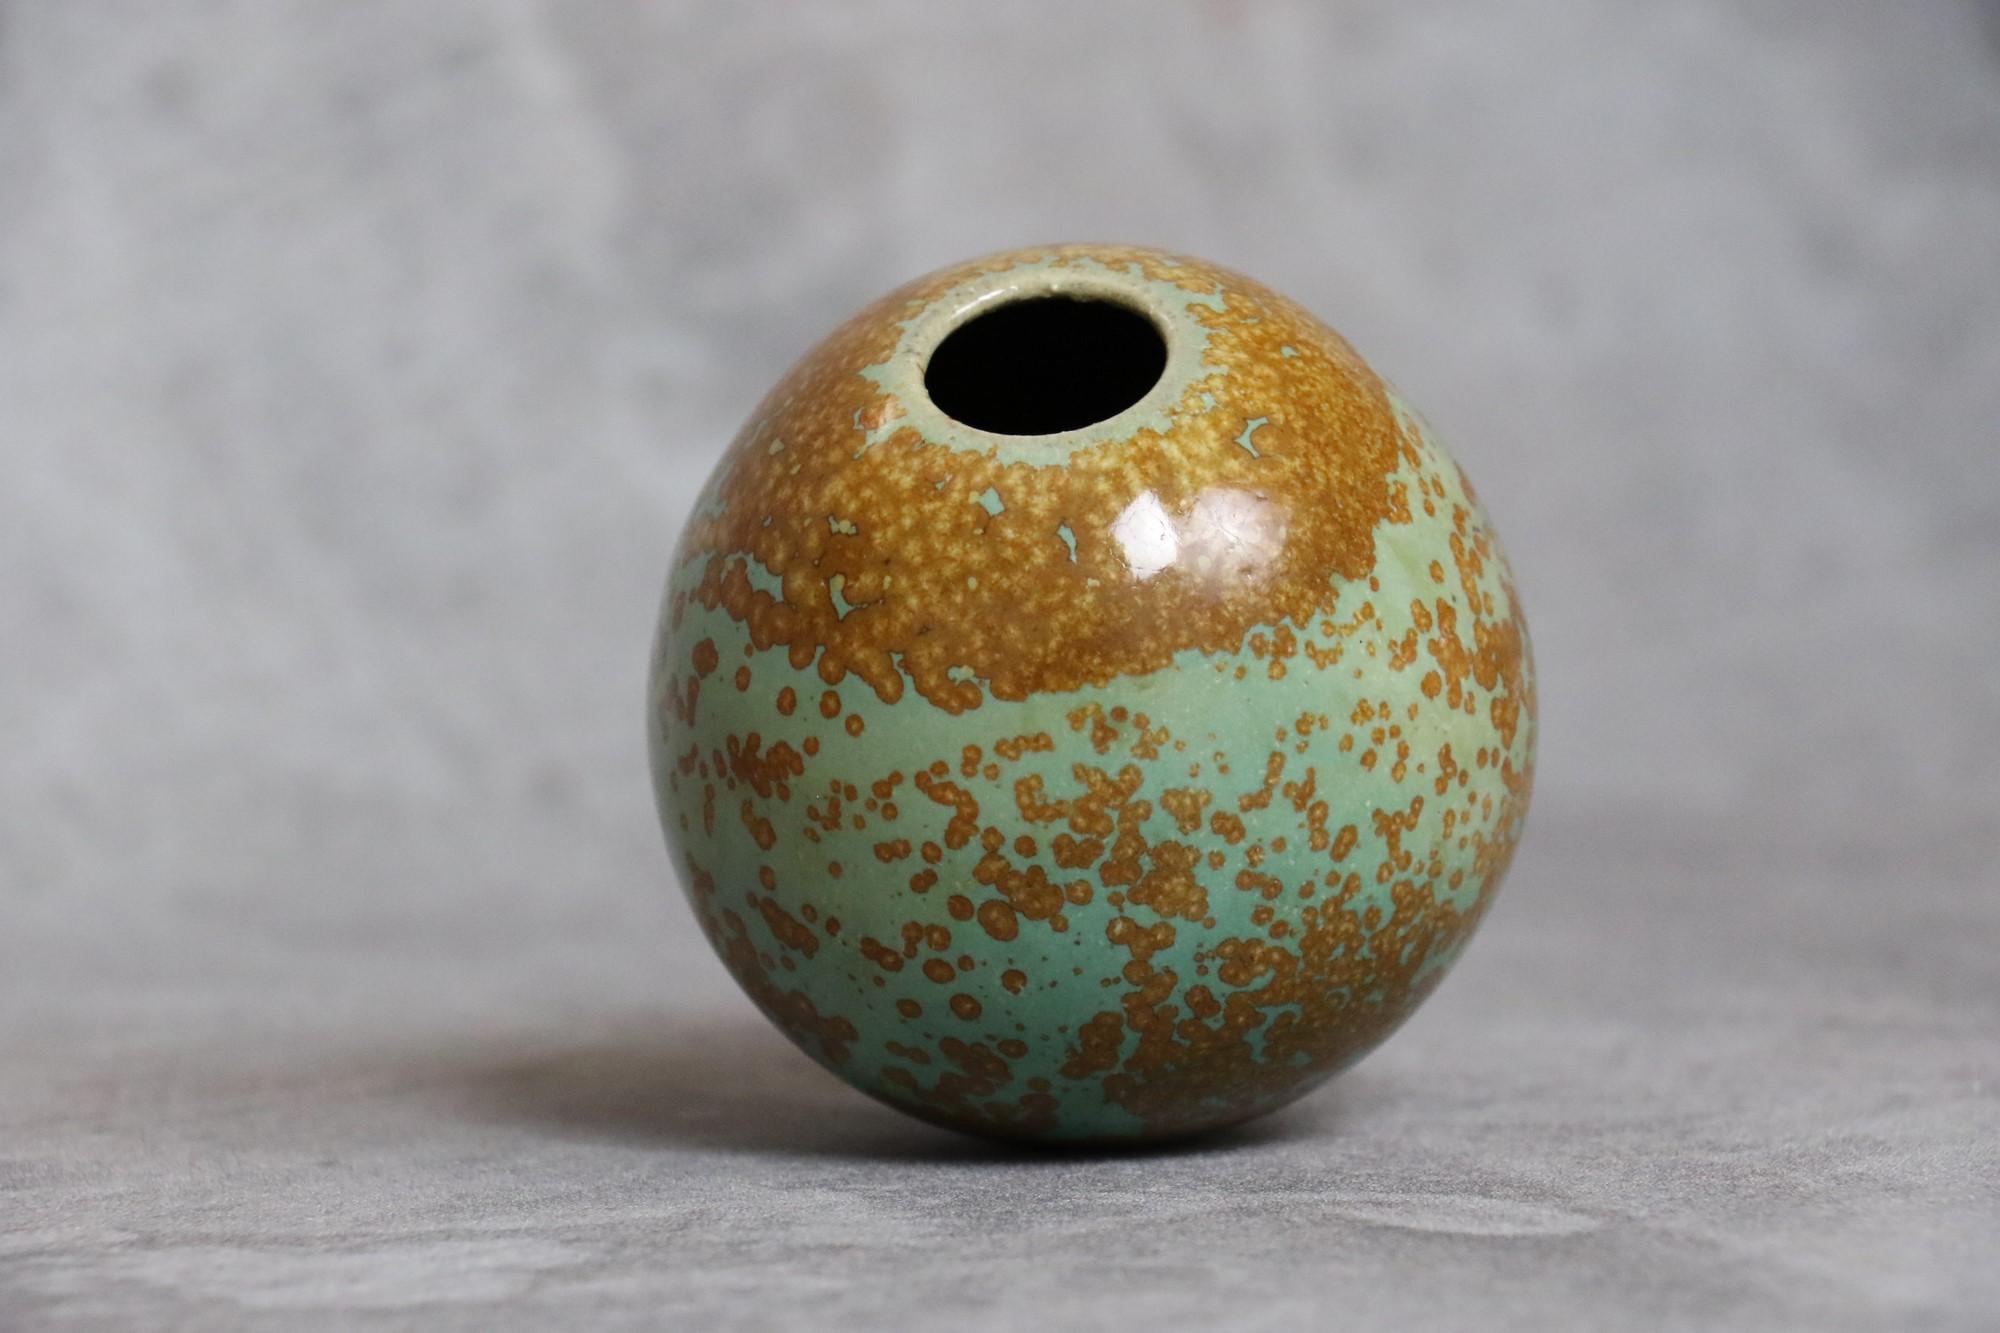 Enameled French Ceramic Ball Vase with Nucleations by Monique Cavallini - circa 2000 For Sale